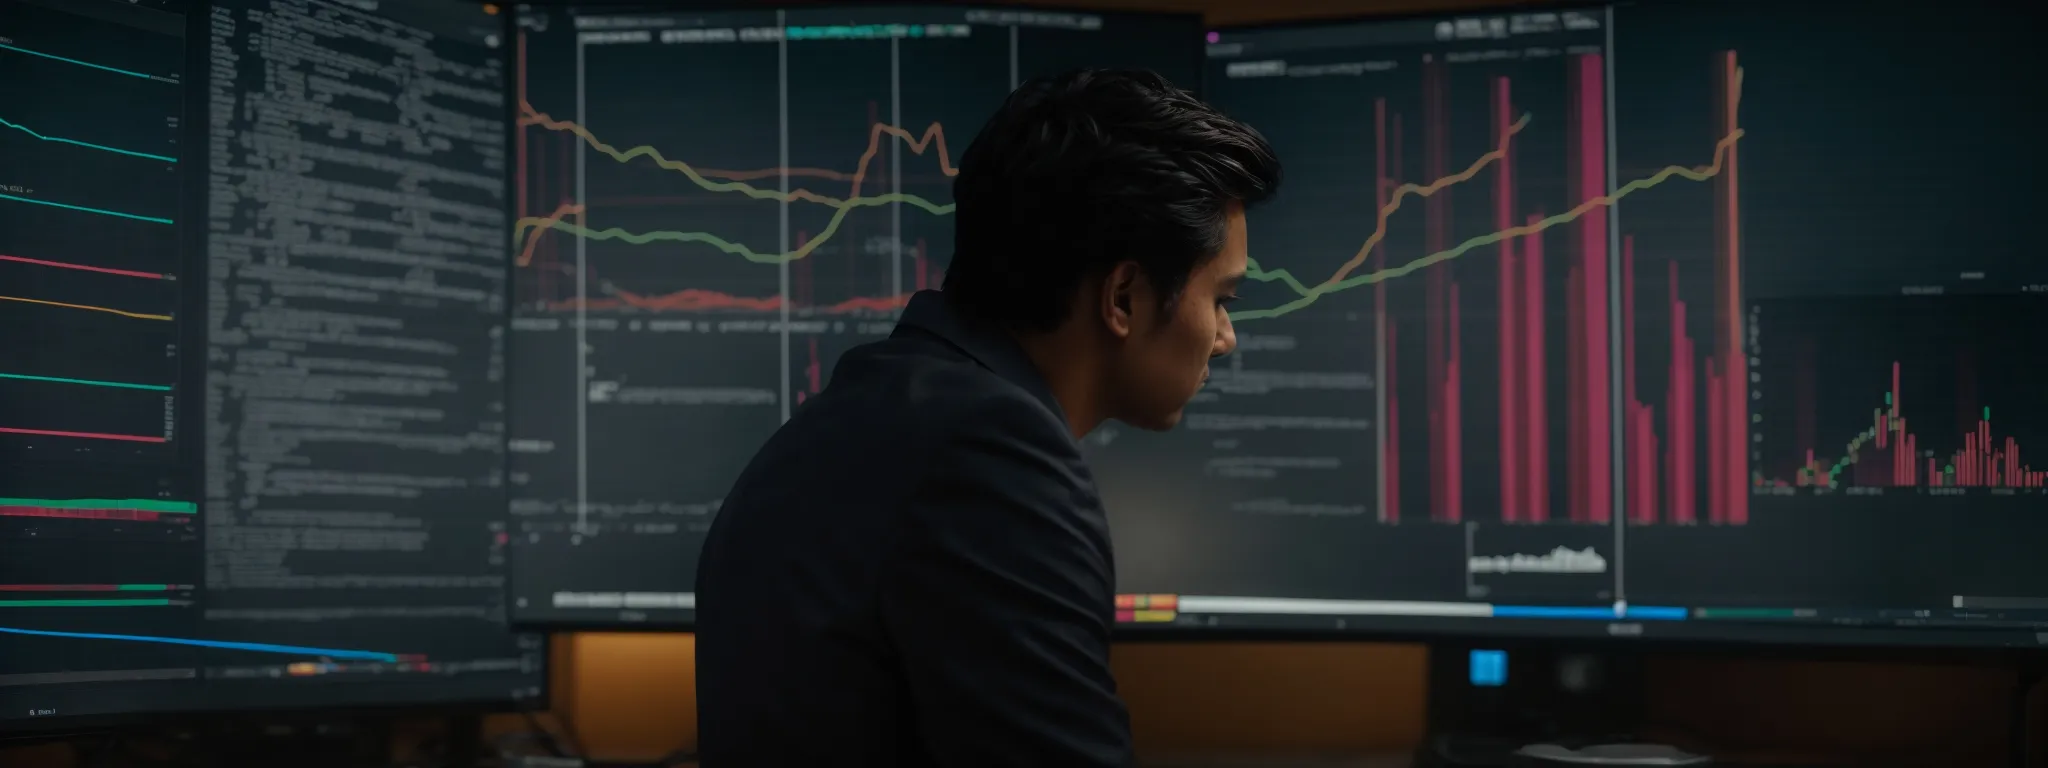 a marketer intently stares at a computer screen displaying multicolored graphs and data analytics.